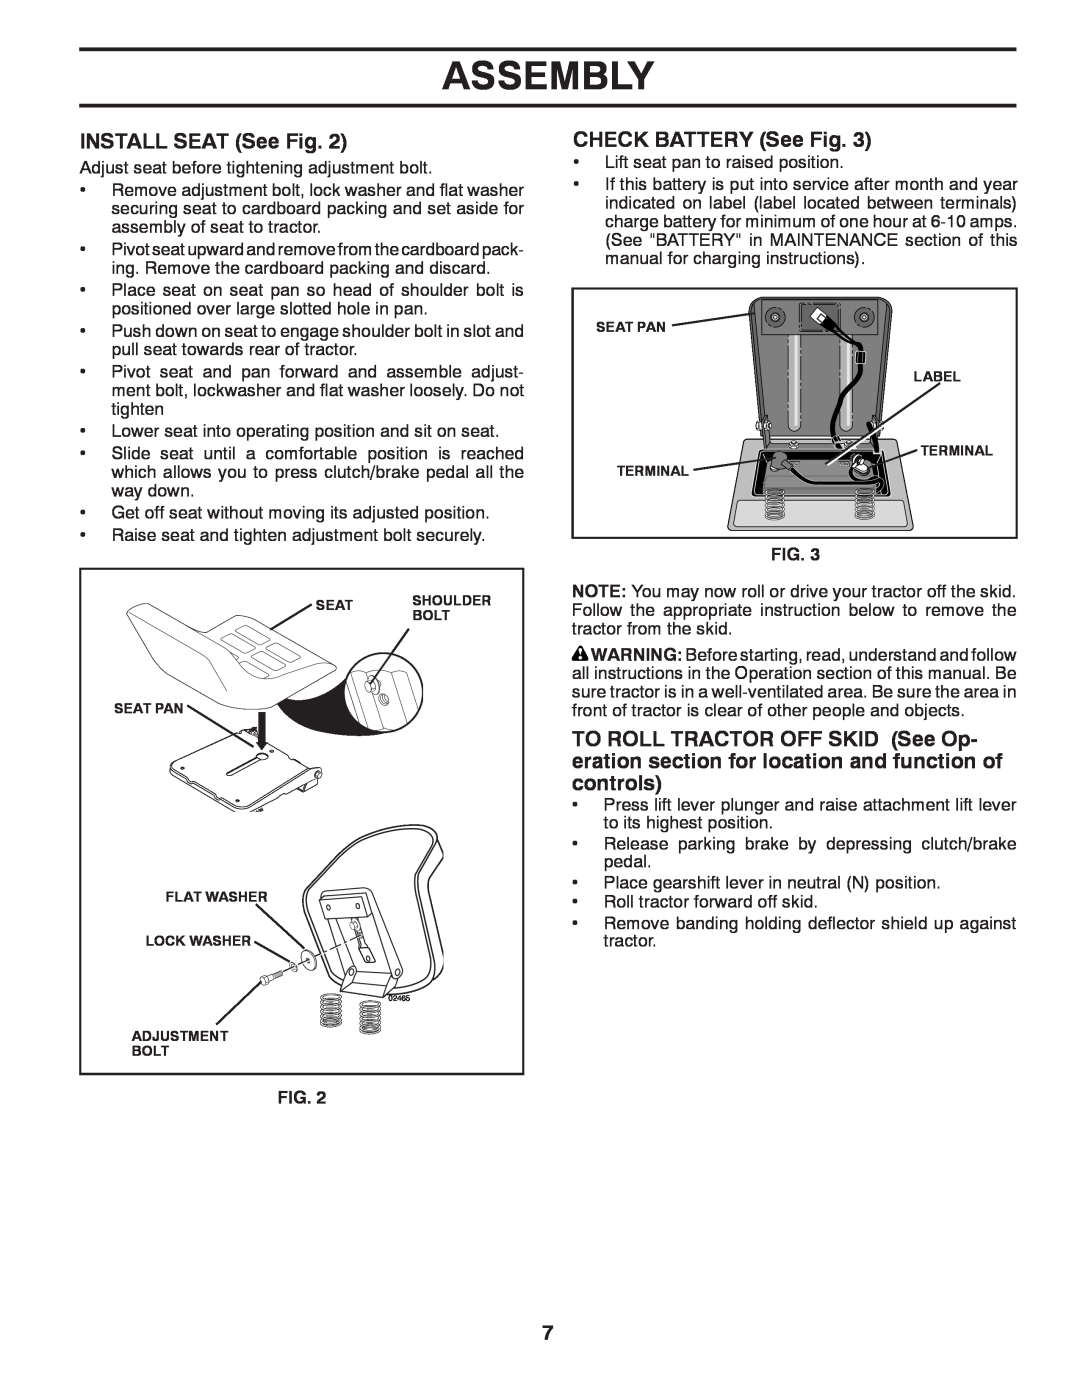 Poulan 414754, 96012006802 manual INSTALL SEAT See Fig, CHECK BATTERY See Fig, Assembly 